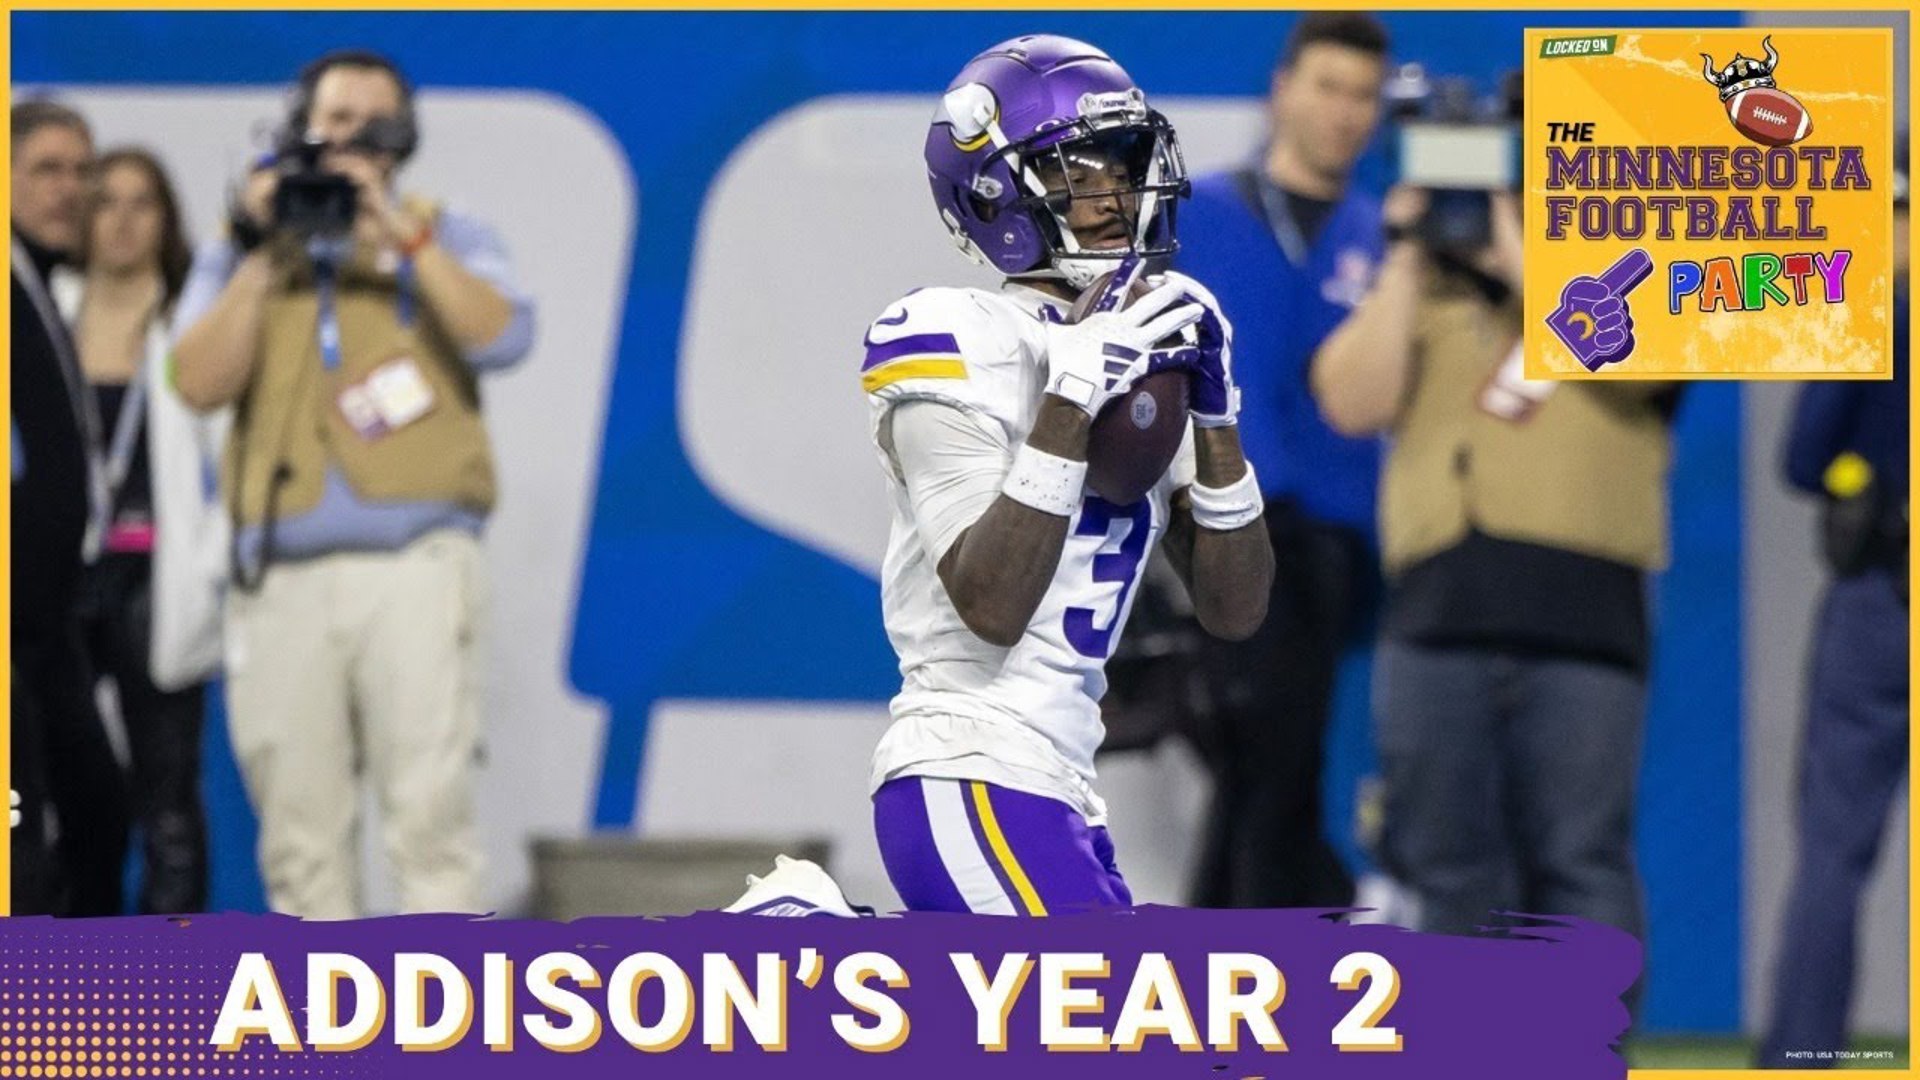 This is Jordan Addison's Year 2 CEILING - The Minnesota Football Party